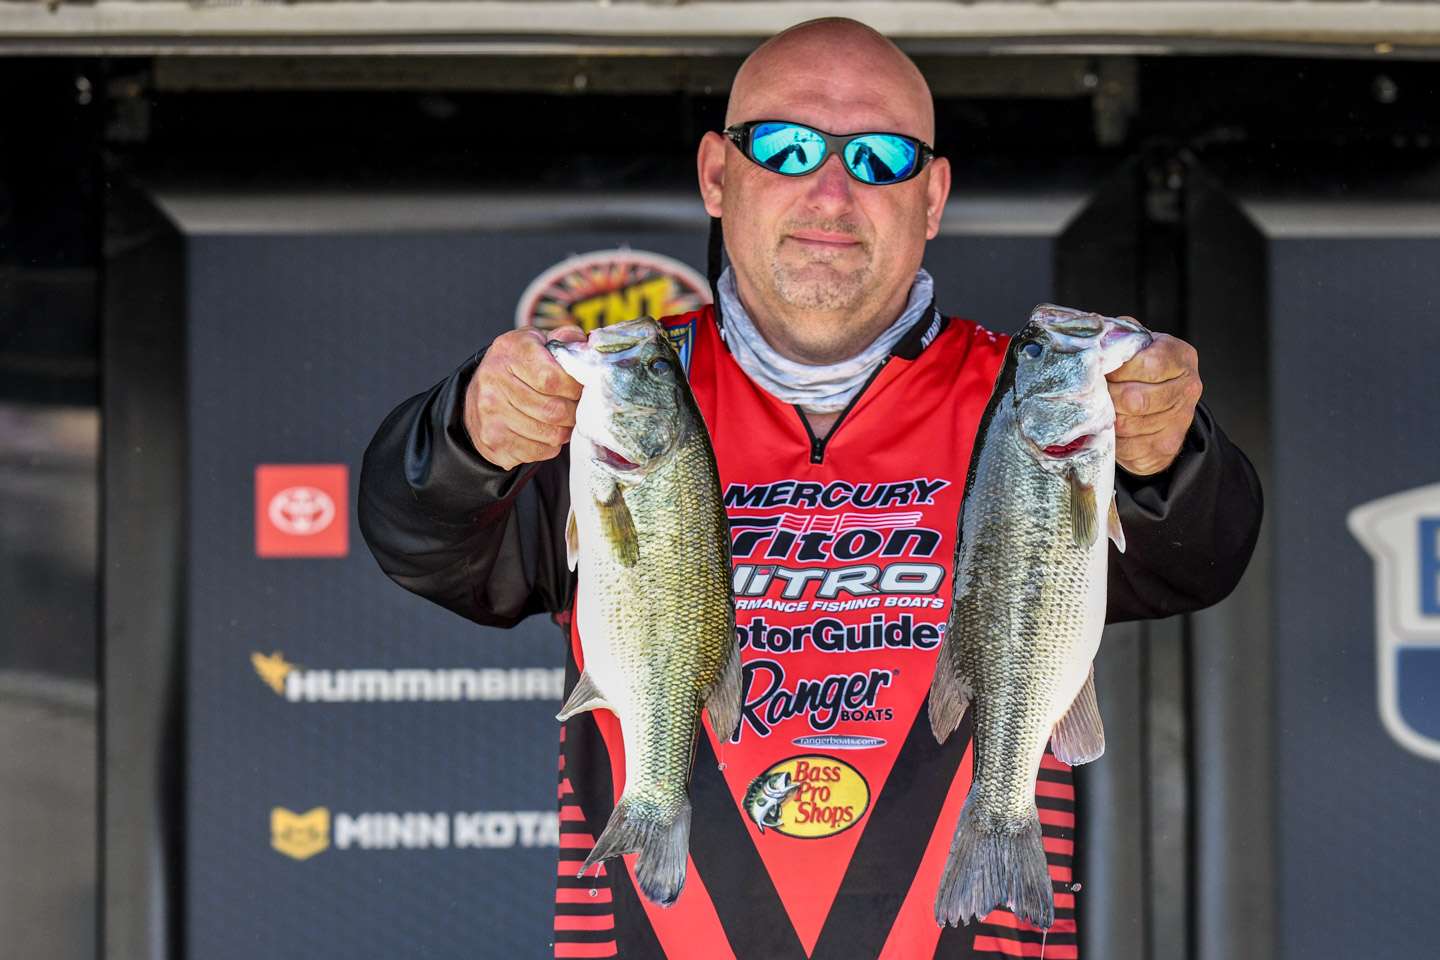 See how the Nation anglers fared after Day 2 of the 2021 TNT Fireworks B.A.S.S. Nation Southeast Regional!
<br><br>
First up, Derek Lilley, North Carolina (6th, 22 - 4)